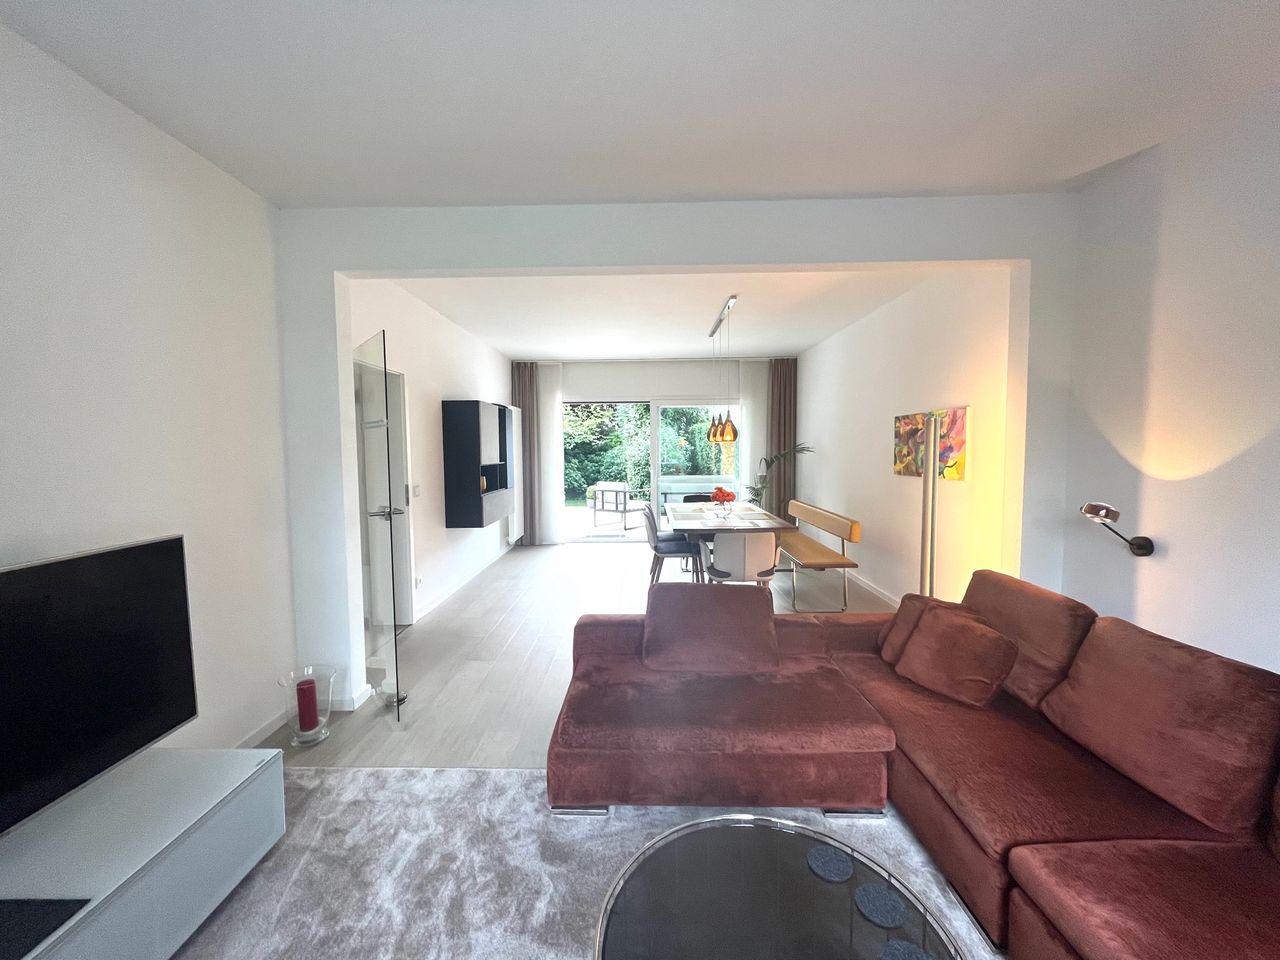 Exclusive apartment in the west of Cologne